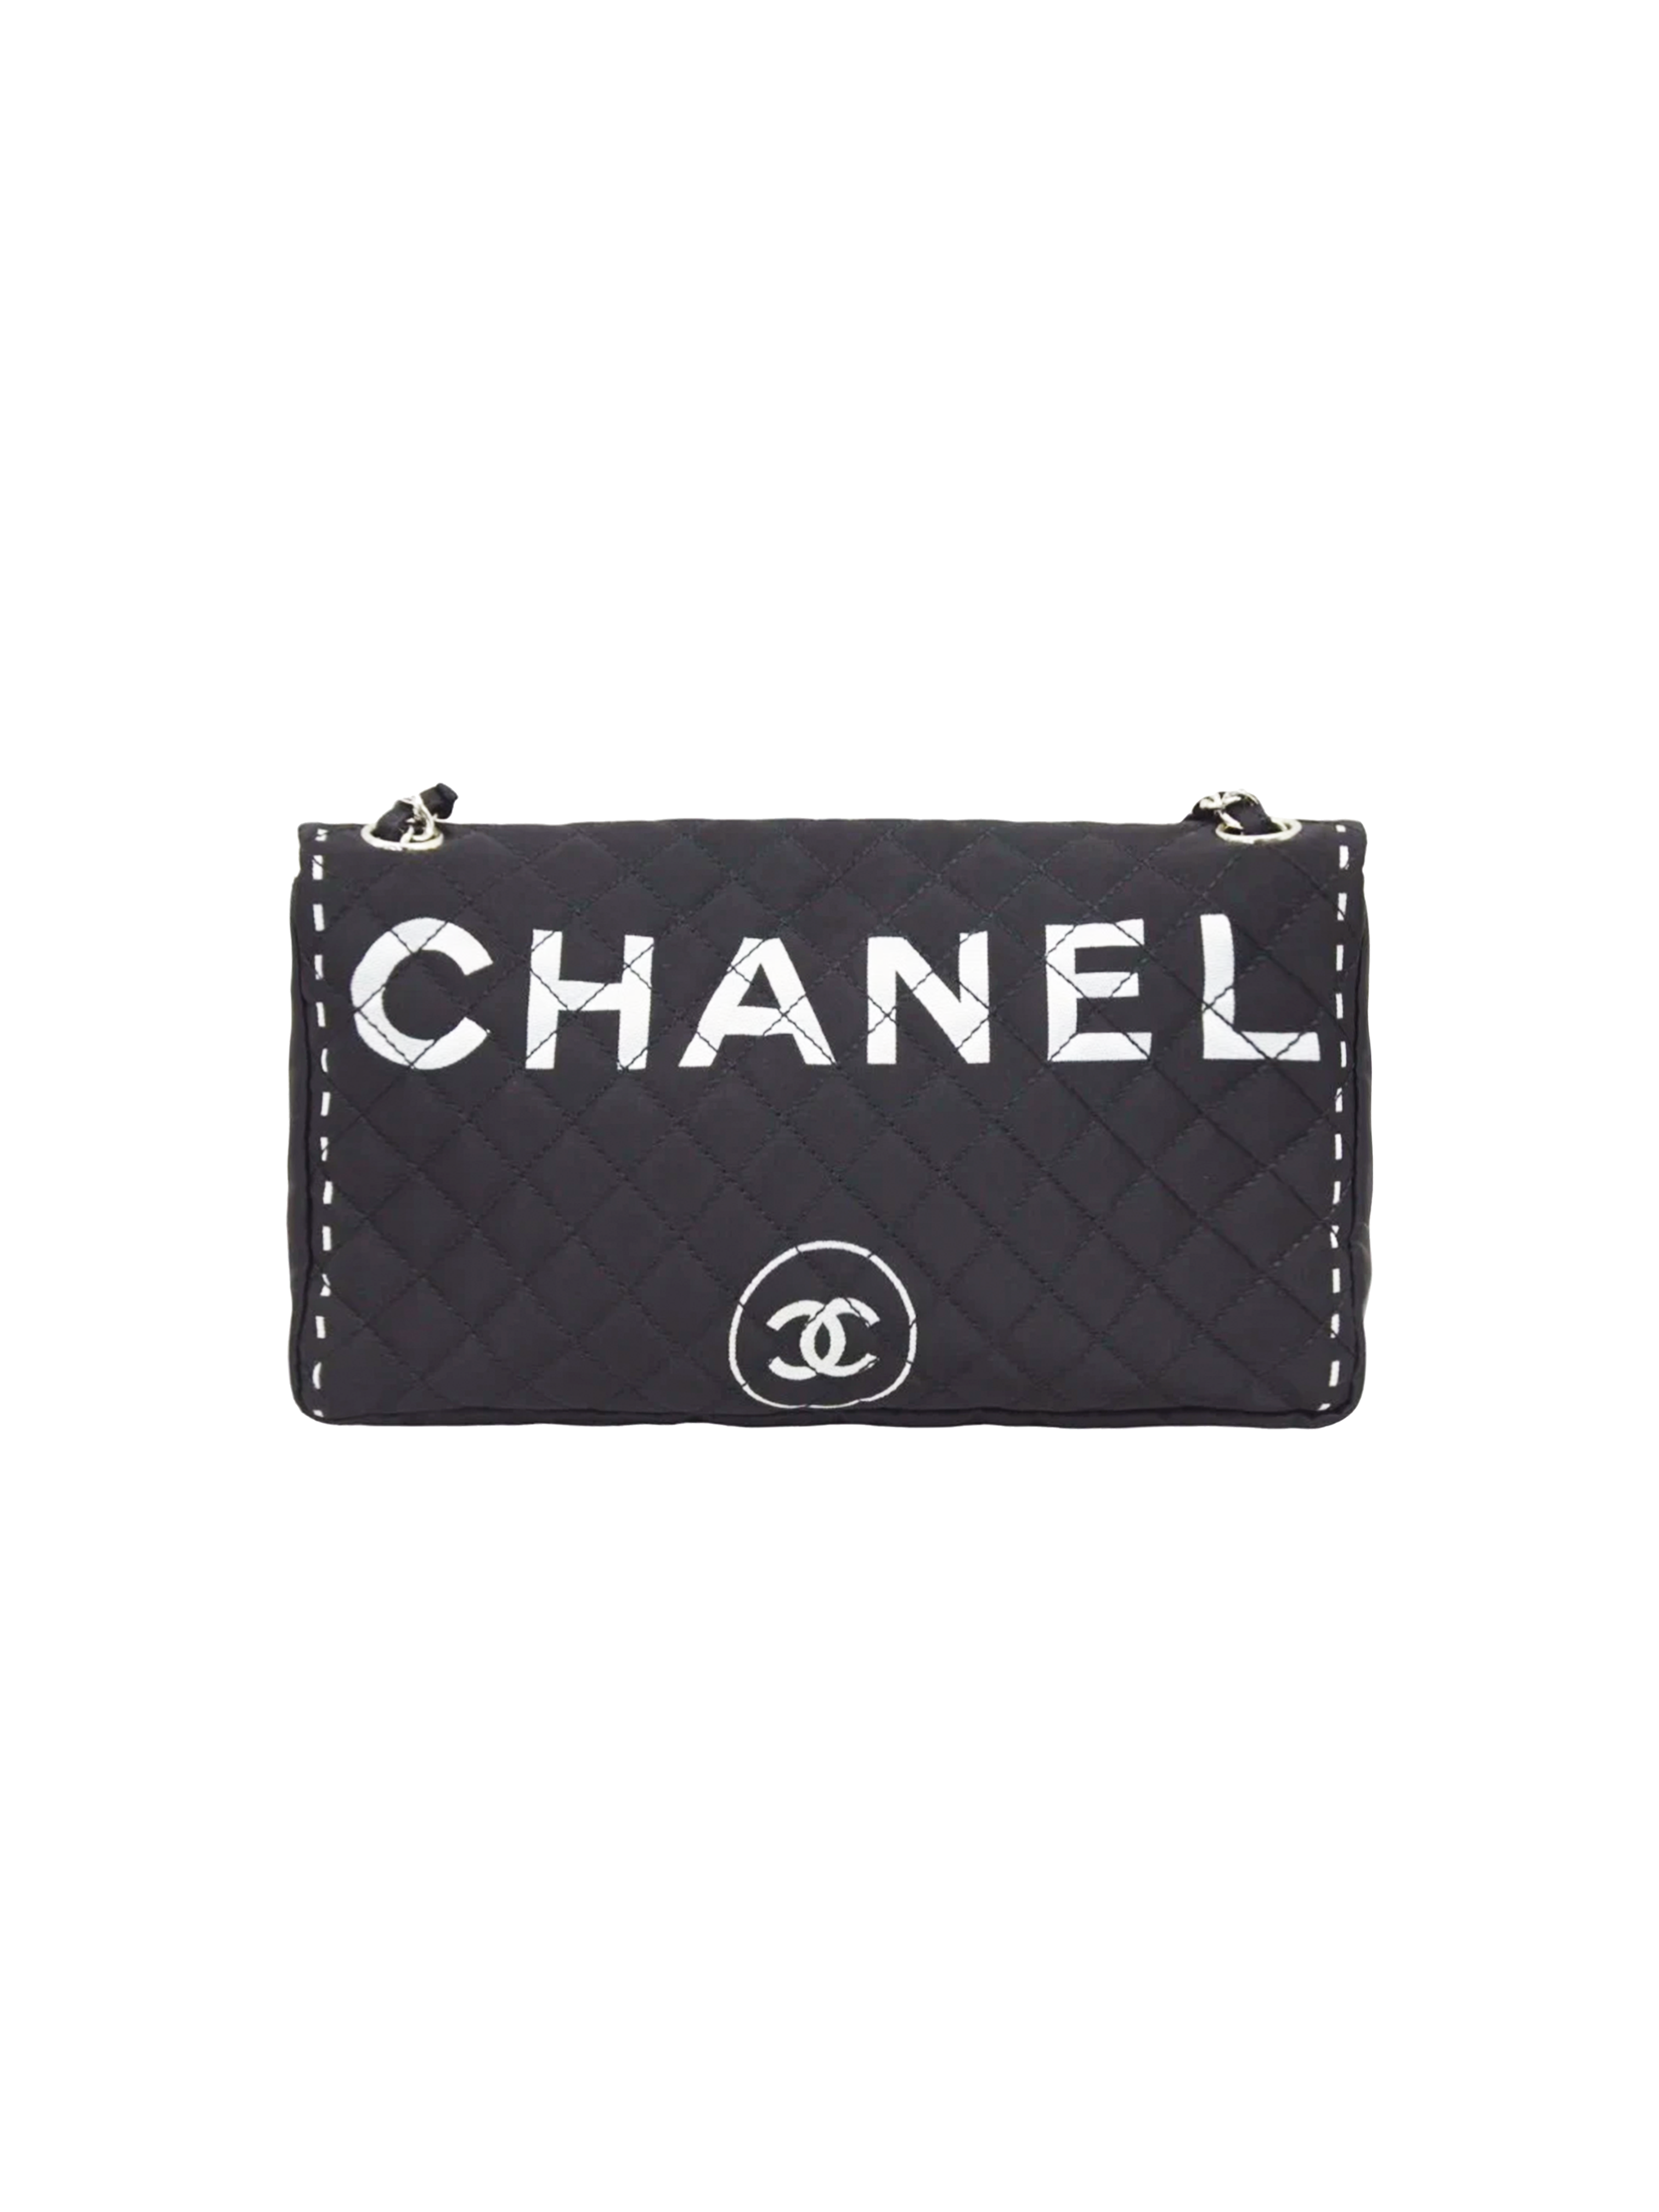 Chanel Black Quilted Lambskin Leather Cc Square Medium Flap Shoulder Bag  Auction